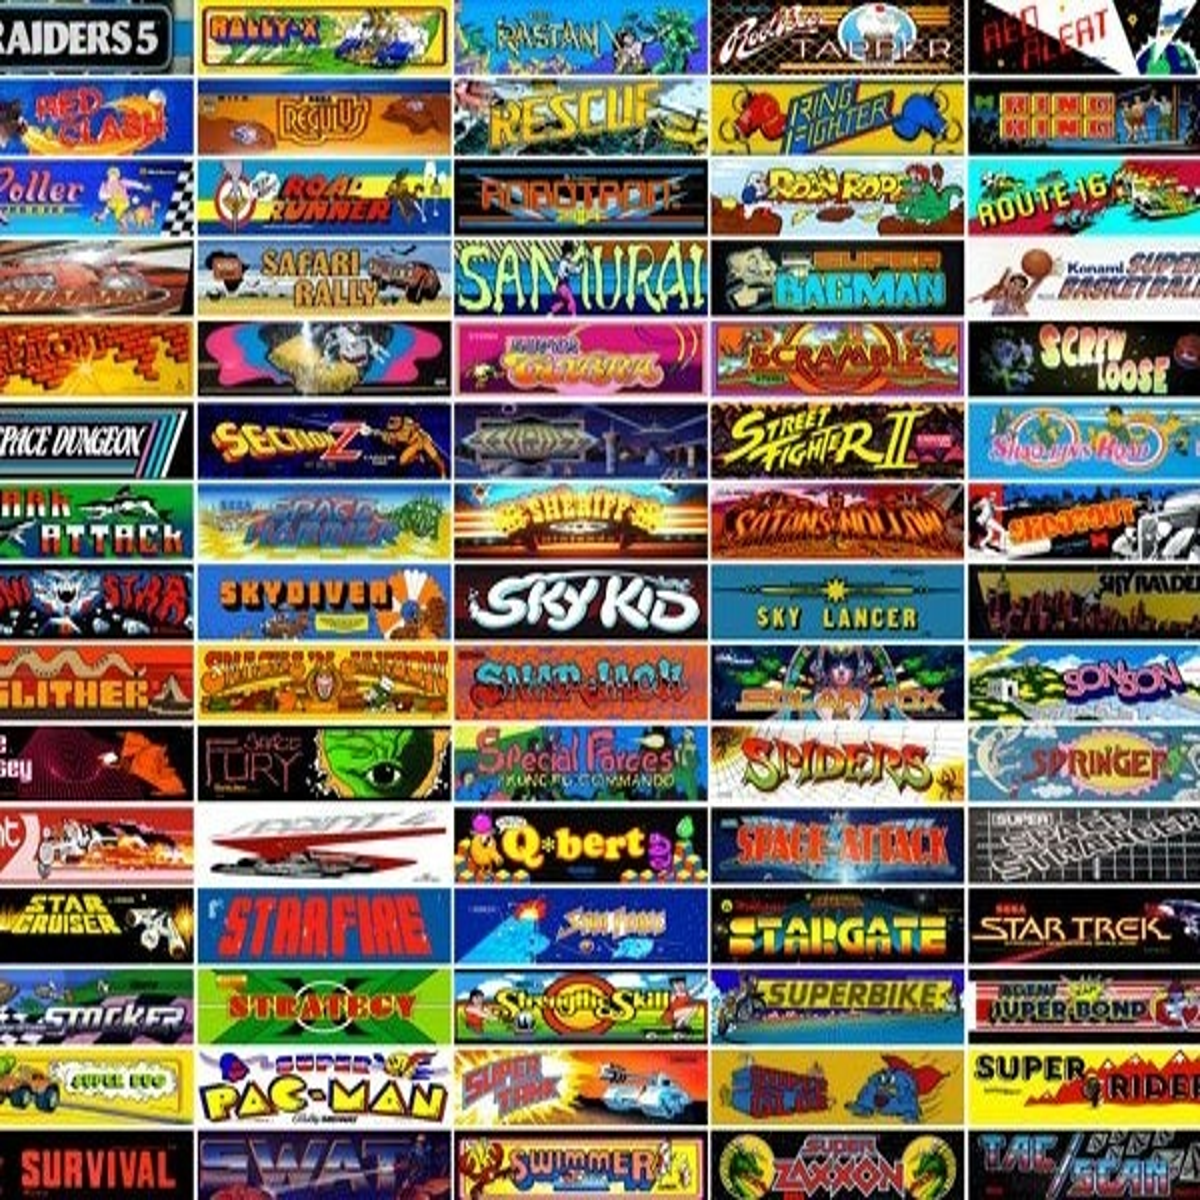 About our Classic Video Game Emulators - Online browser play of